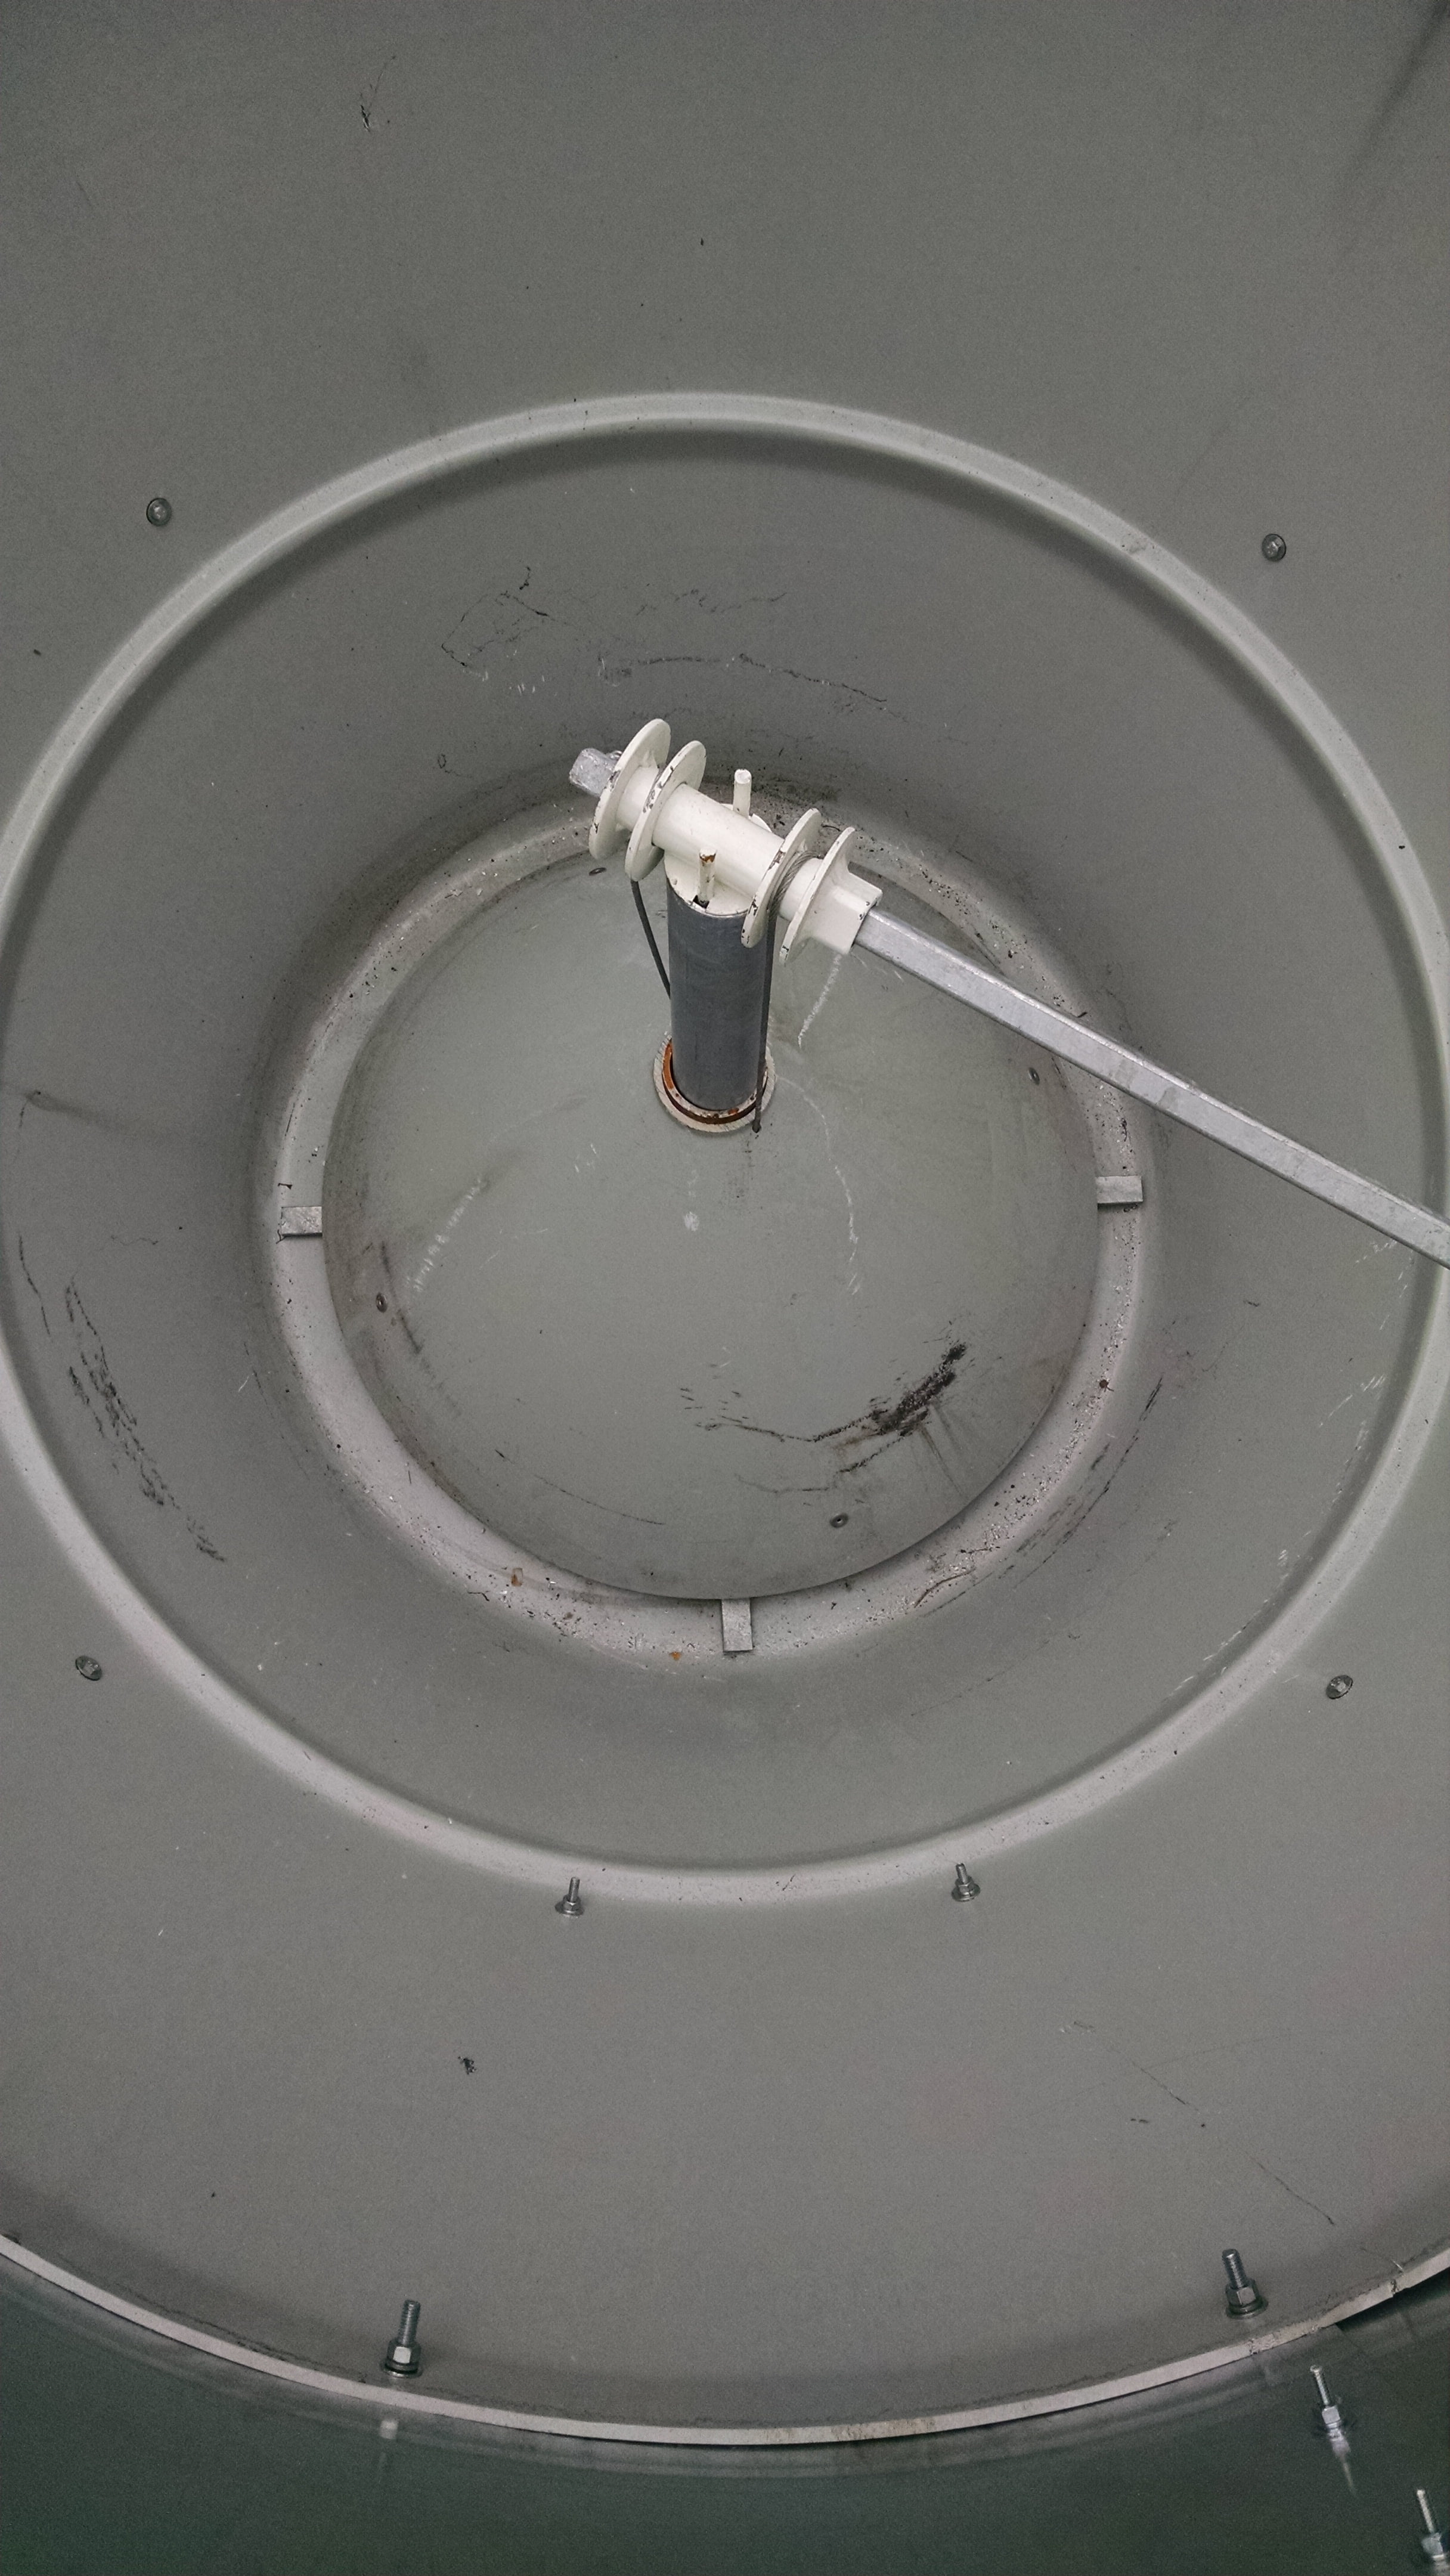 Looking down from the top.  The outer wall tapers in toward the bottom and an inner cone in the center directs feed to a spinning agitator just below.  The inner cone is raised by cables to adjust the gap to control the flow of feed.